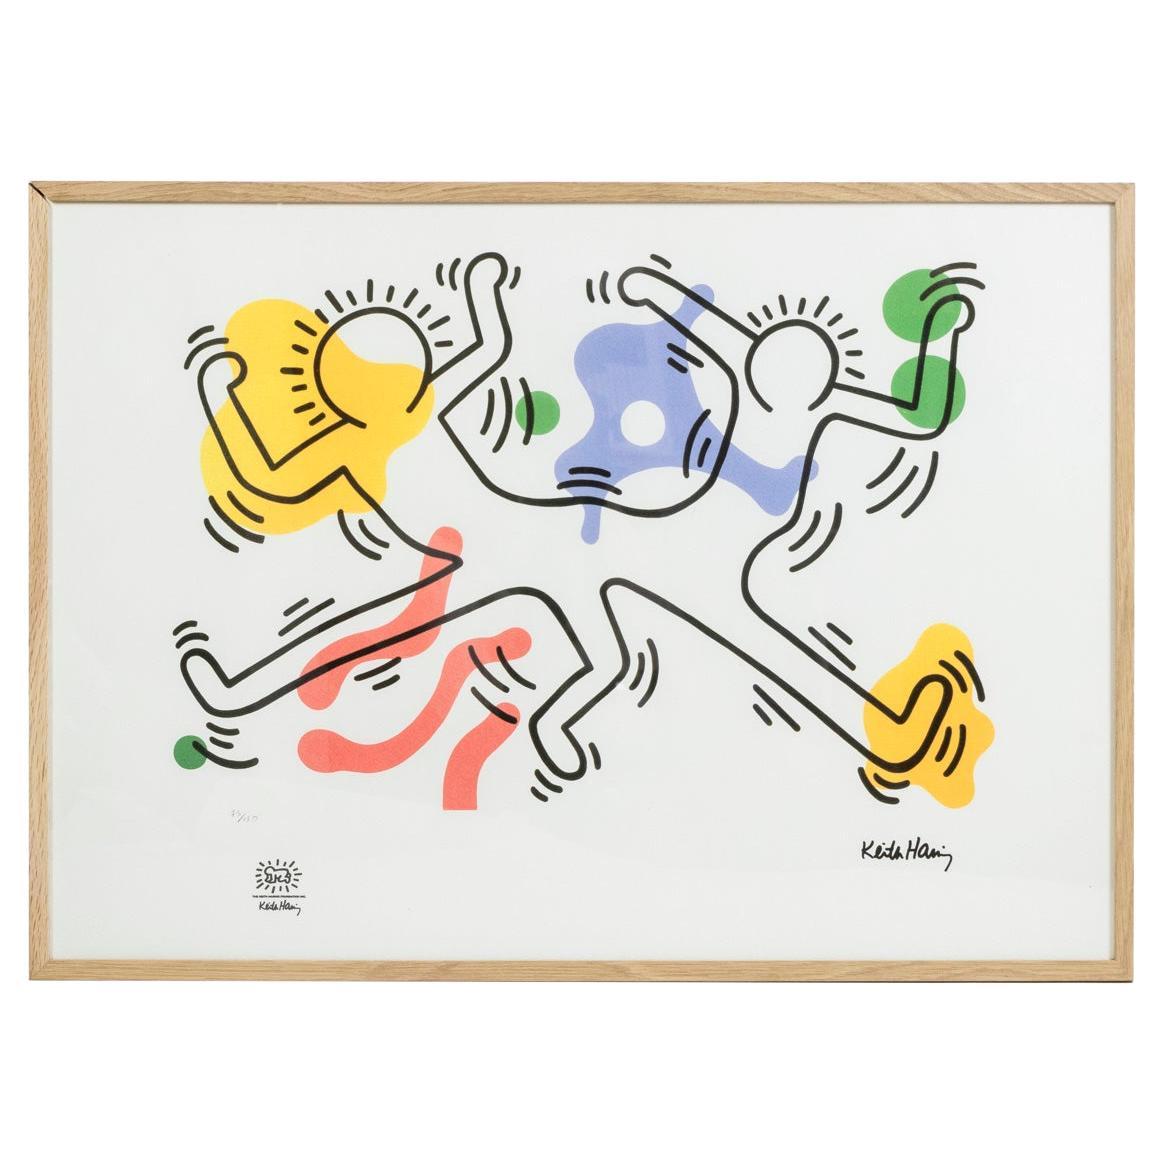 How can I tell if my Keith Haring is original?